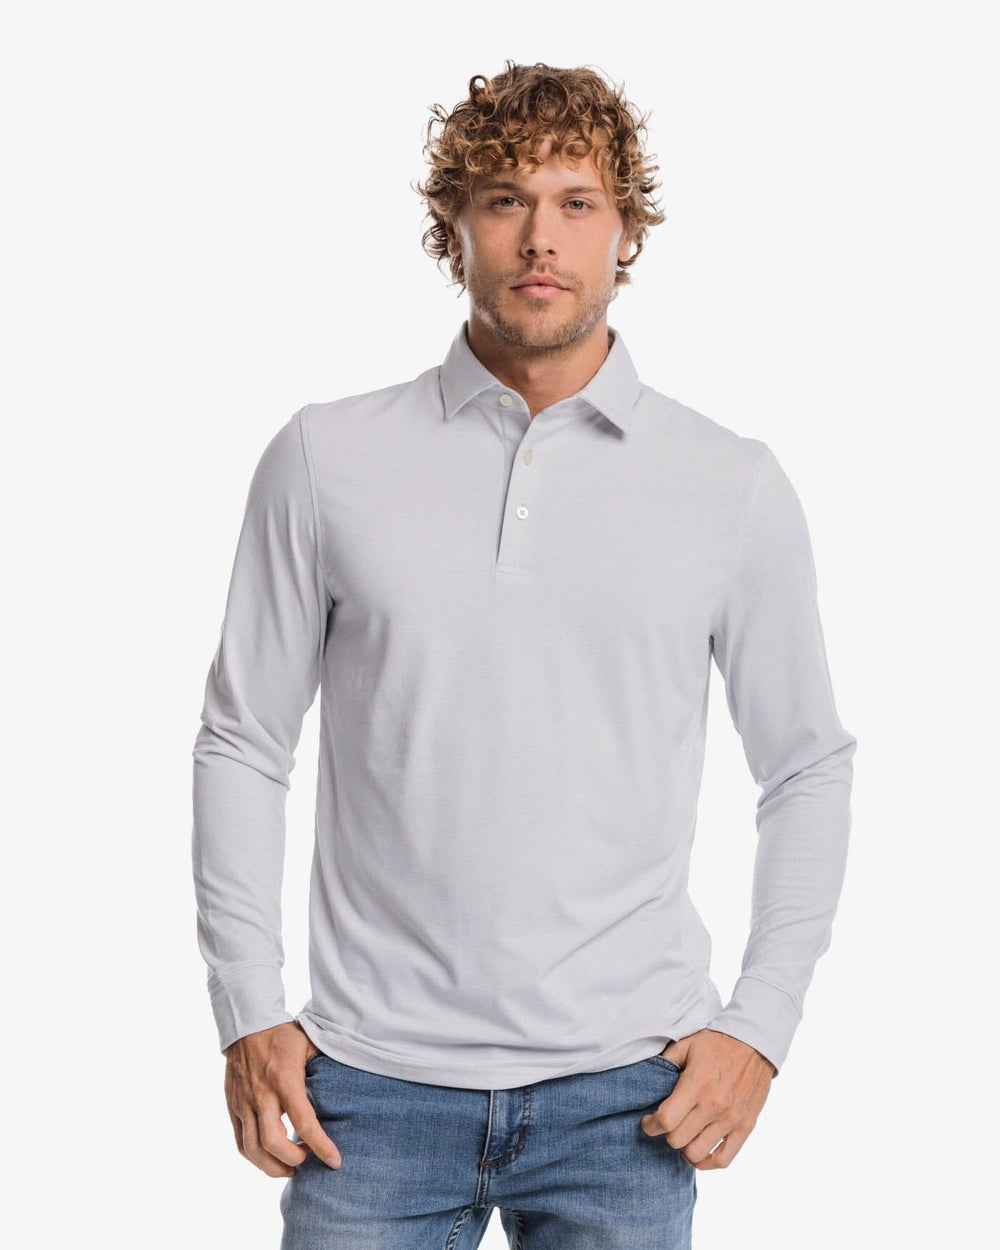 The front view of the Southern Tide Ryder Heather Ridgeway Stripe Long Sleeve Performance Polo by Southern Tide - Heather Platinum Grey